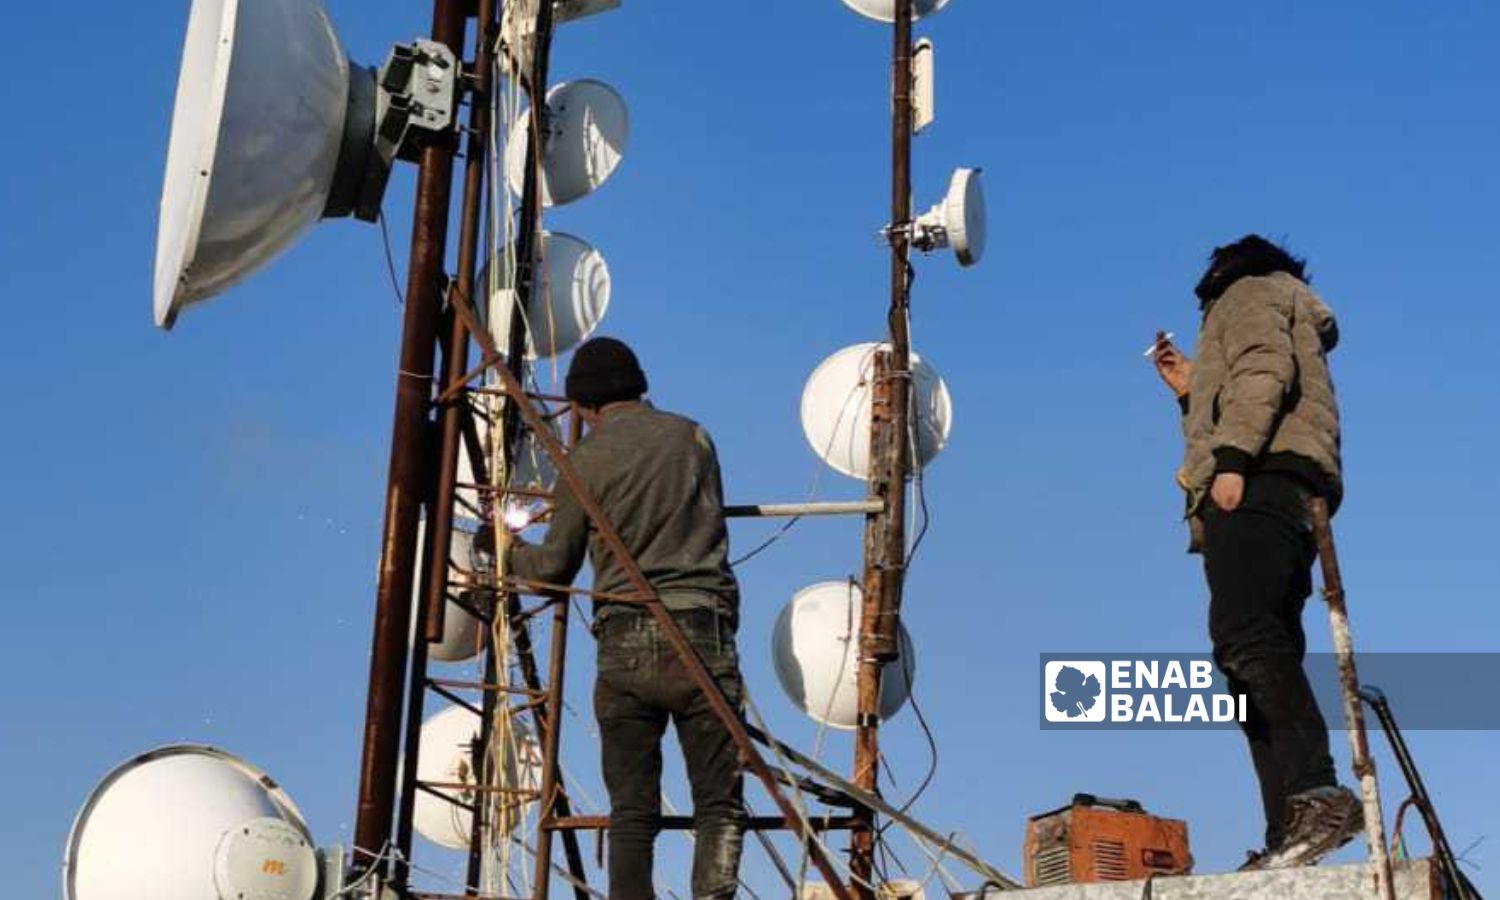 Workers carrying out maintenance of an internet network in the northwestern city of Idlib - February 23, 2023 (Enab Baladi/Anas al-Khouli)